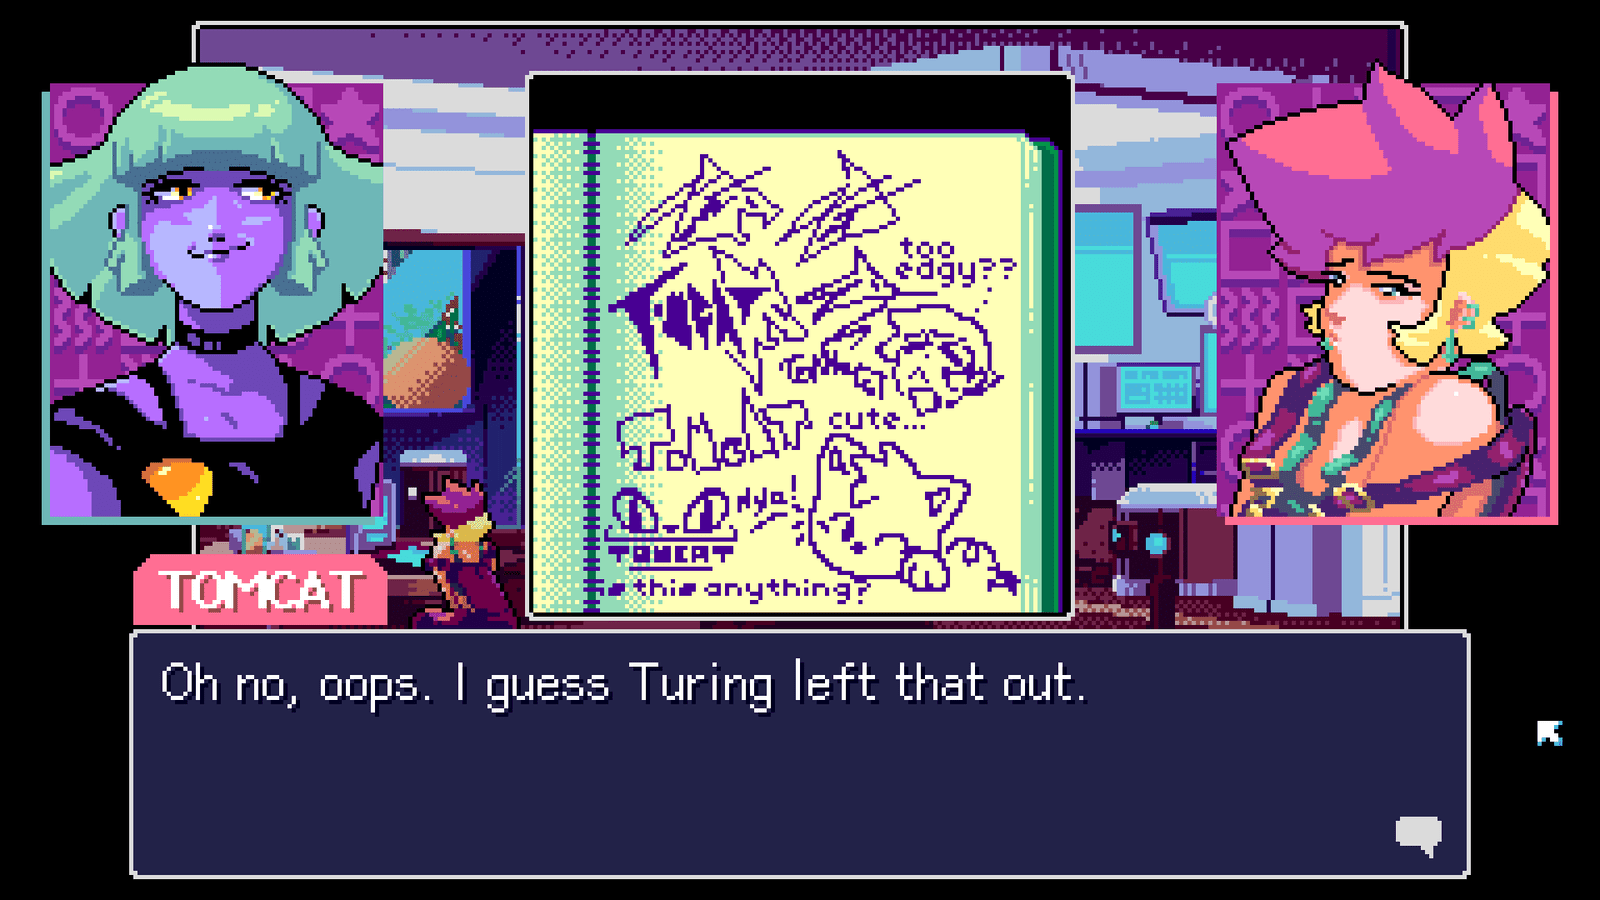 Read Only Memories: NEURODIVER